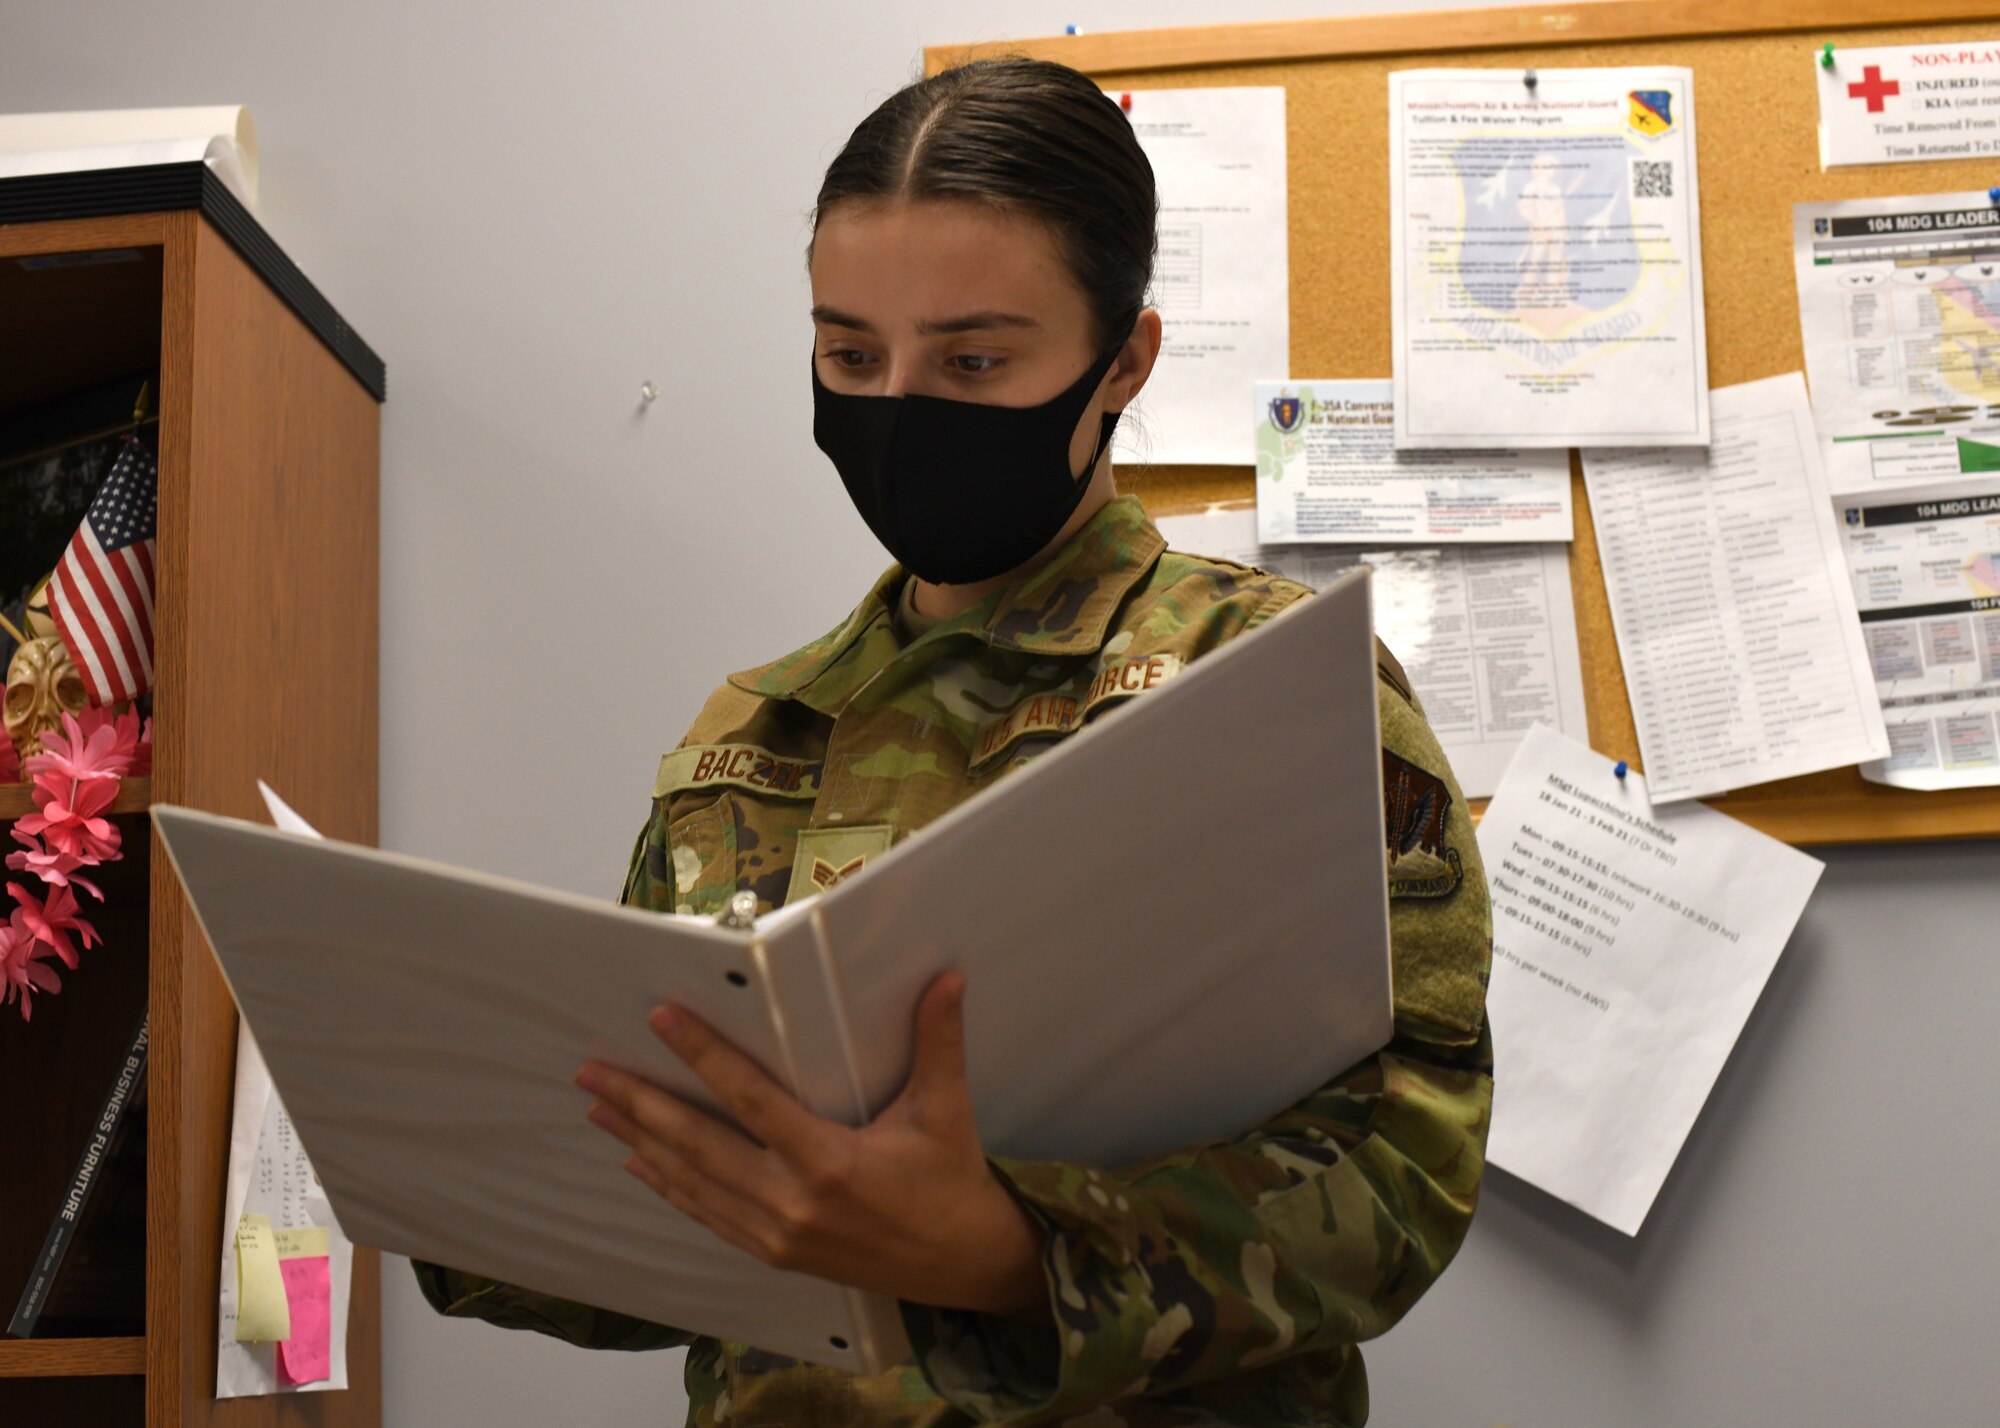 Senior Airman Weronika Baczek, a public health technician with the 104th Medical Group, views a binder, in her office at Barnes Air National Guard Base, Massachusetts, Feb. 17, 2021. Contact tracing is critical for safeguarding 104th Fighter Wing mission readiness and the health of our Barnestormers and surrounding communities from COVID-19. (U.S. Air National Guard courtesy photo)